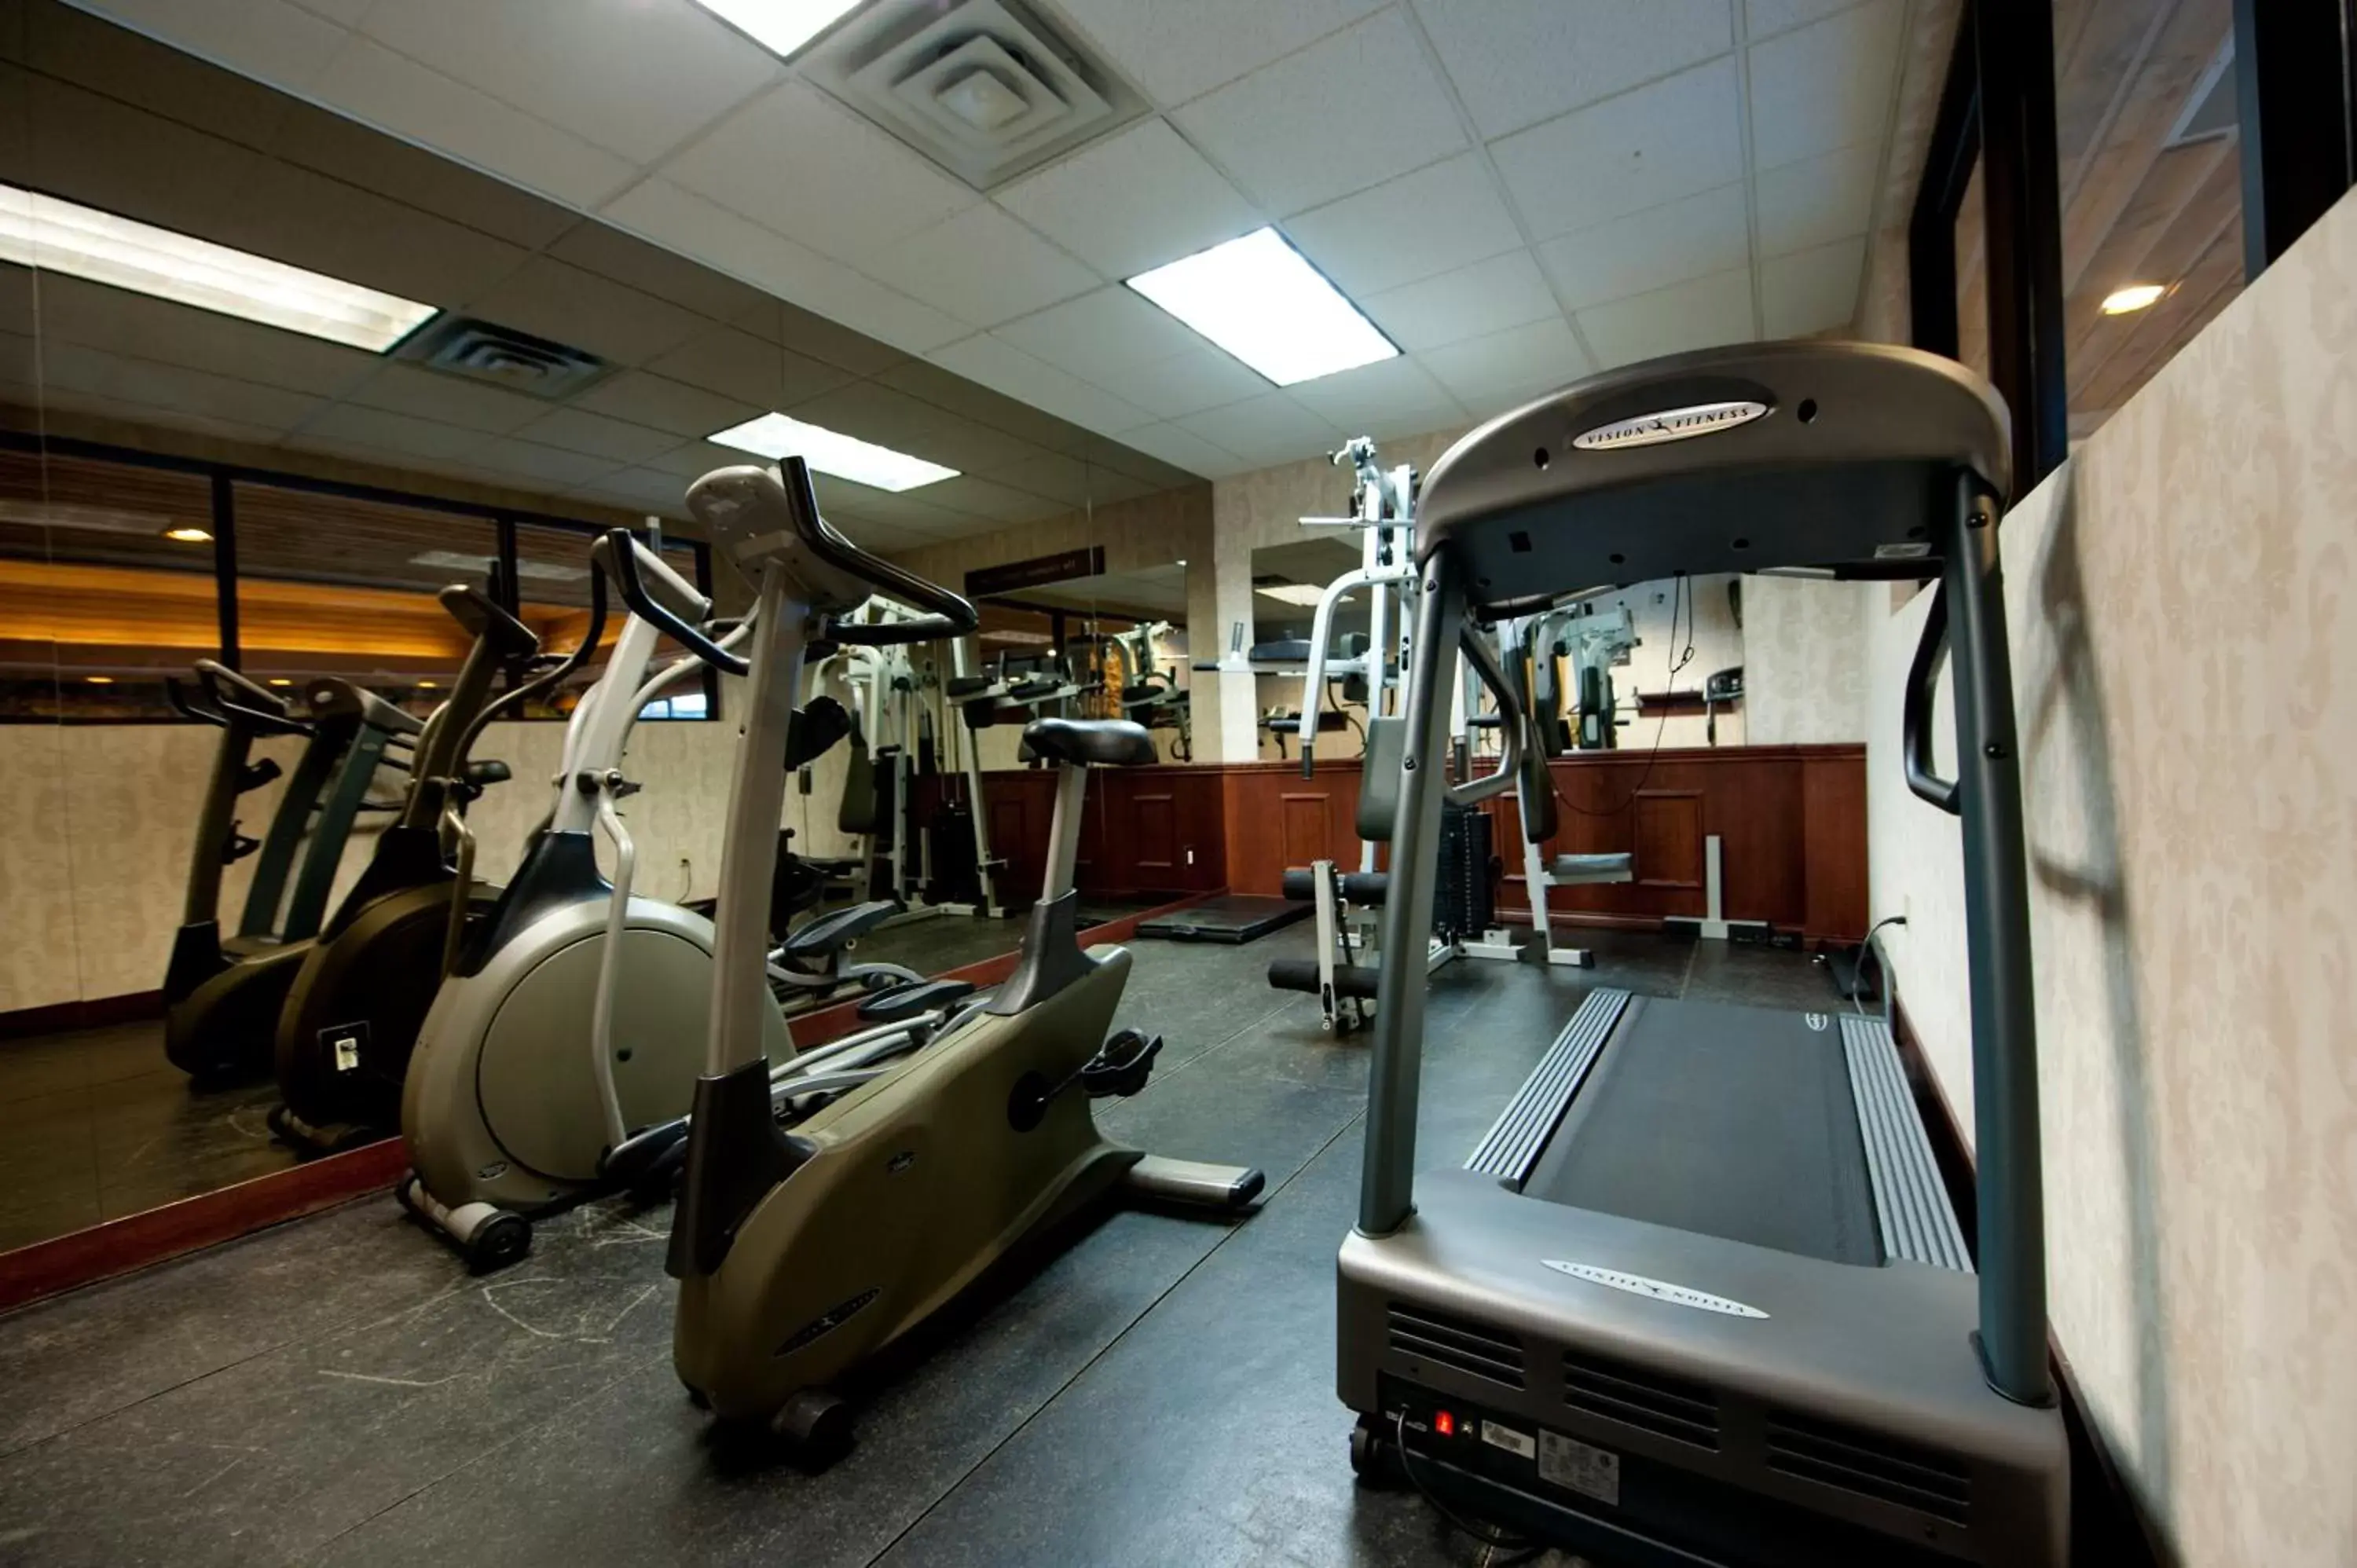 Fitness centre/facilities, Fitness Center/Facilities in The Thompson Hotel